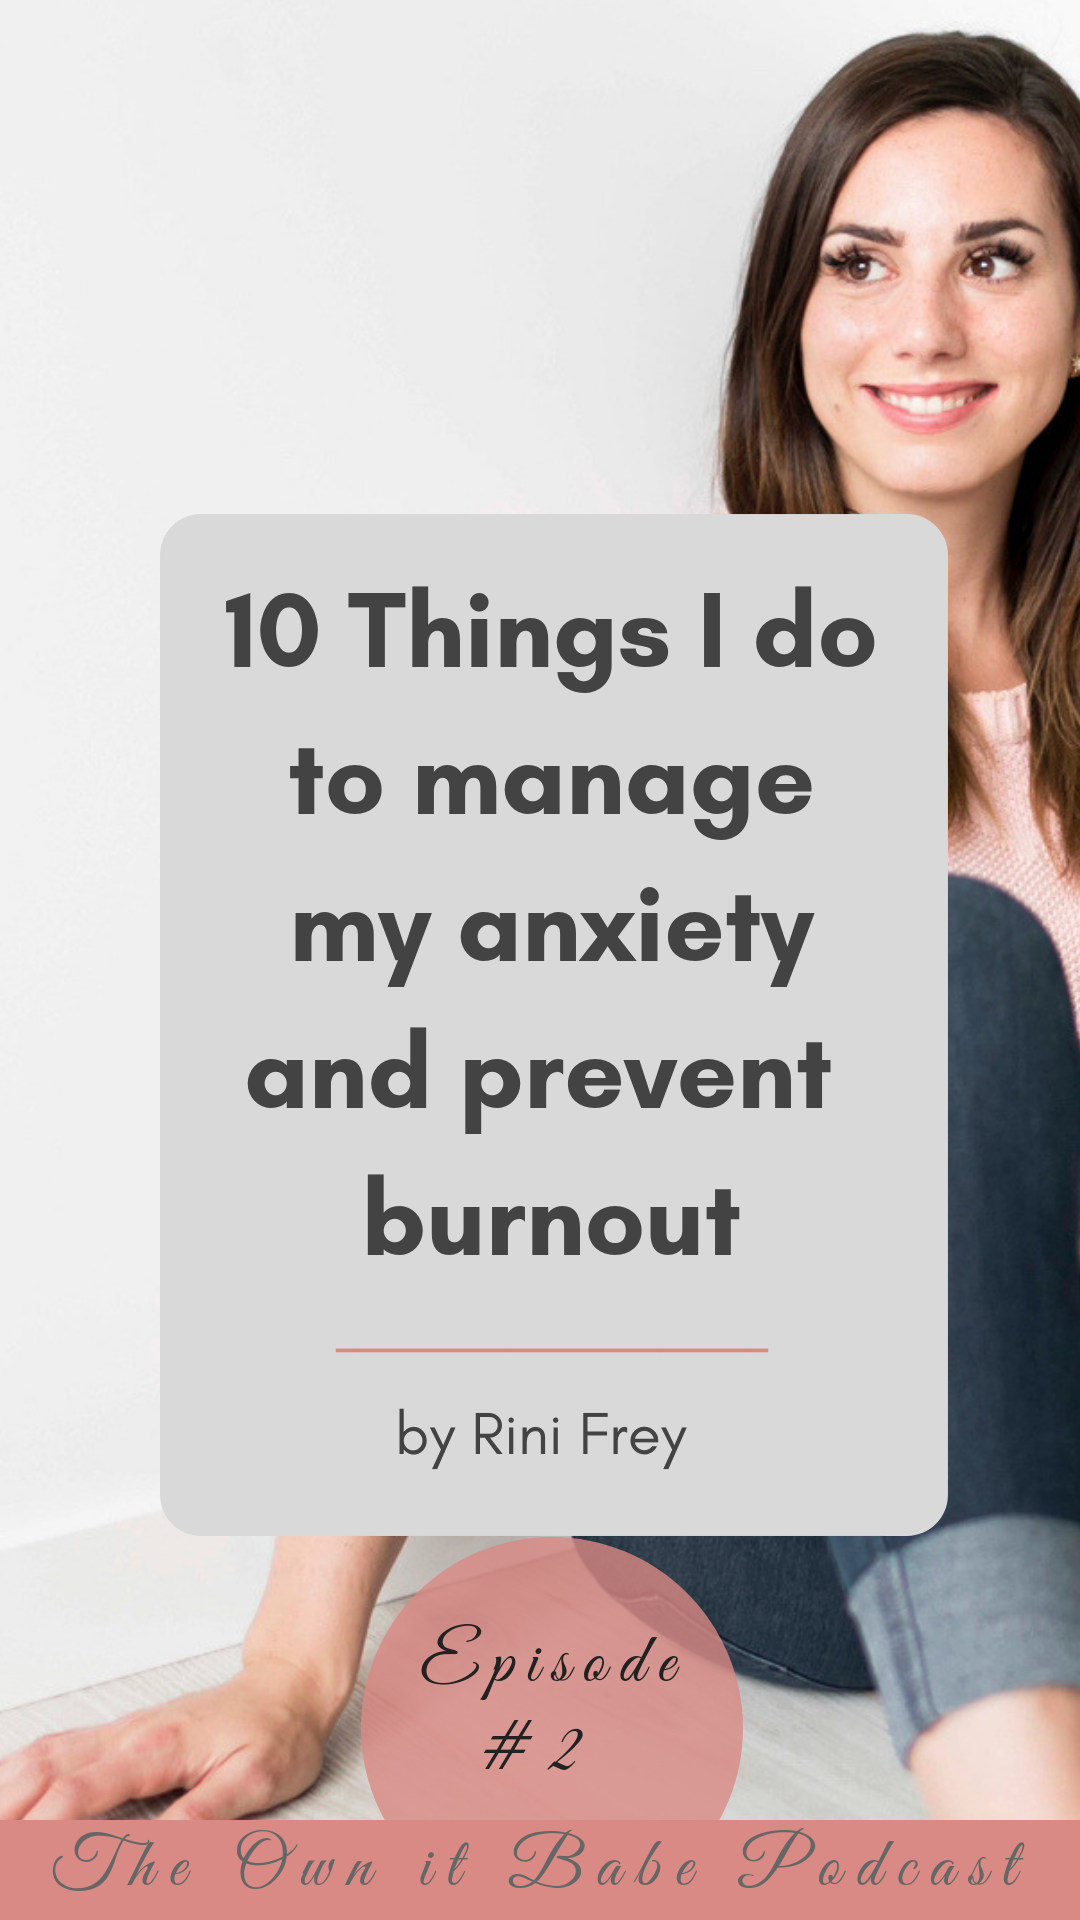 10 Things I do on a daily basis to manage my anxiety and prevent burnout and depression, by Rini Frey - ownitbabe.ca This is episode number 2 of the Own it Babe Podcast